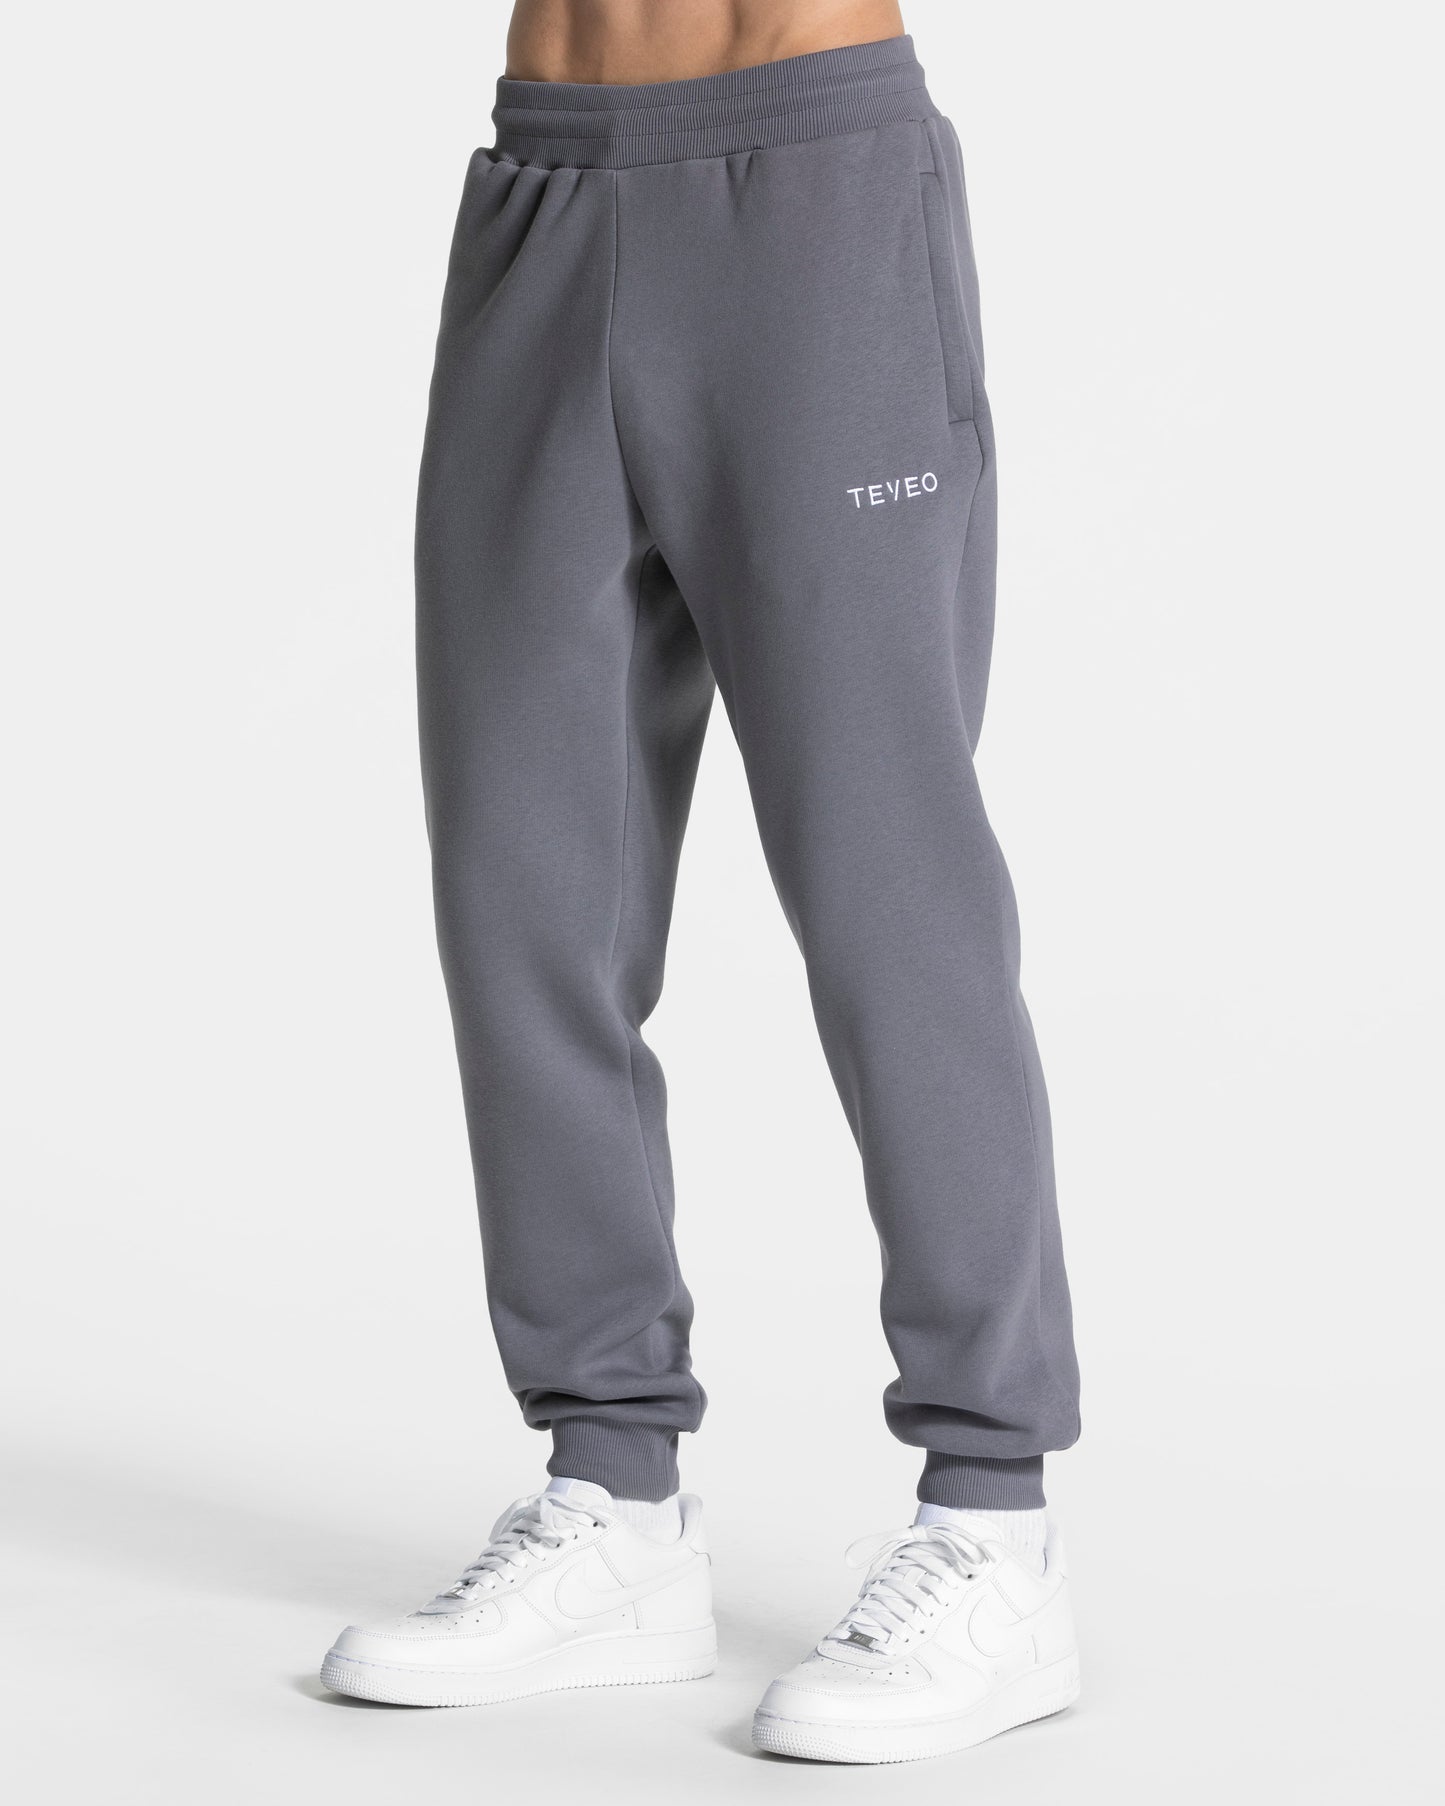 Arrival Jogger "Graphit"